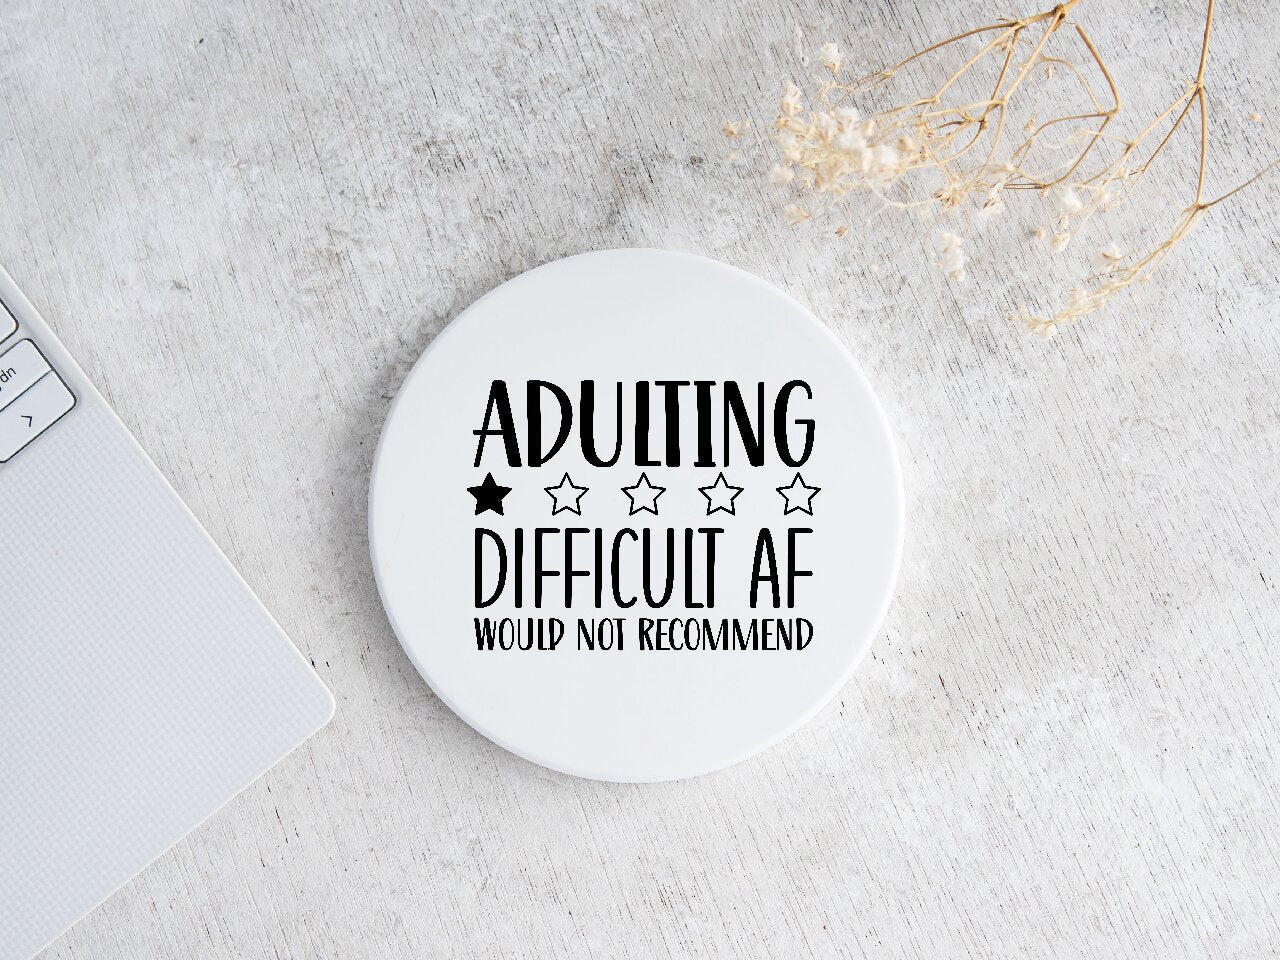 Adulting 1 Star Difficult AF Would Not Recommend - Coaster